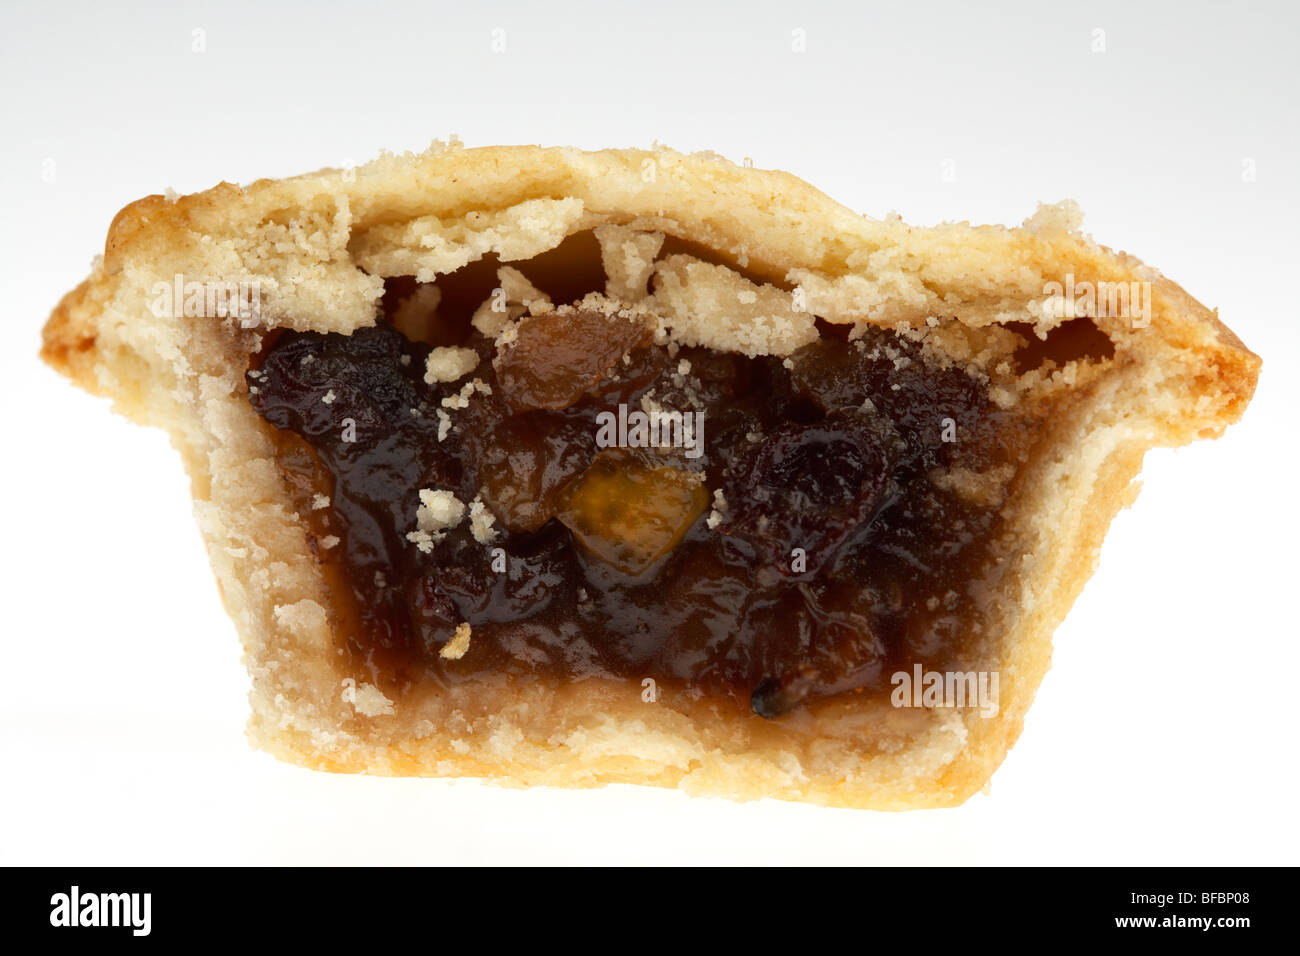 mince pie cut in half showing contents on a white background Stock Photo